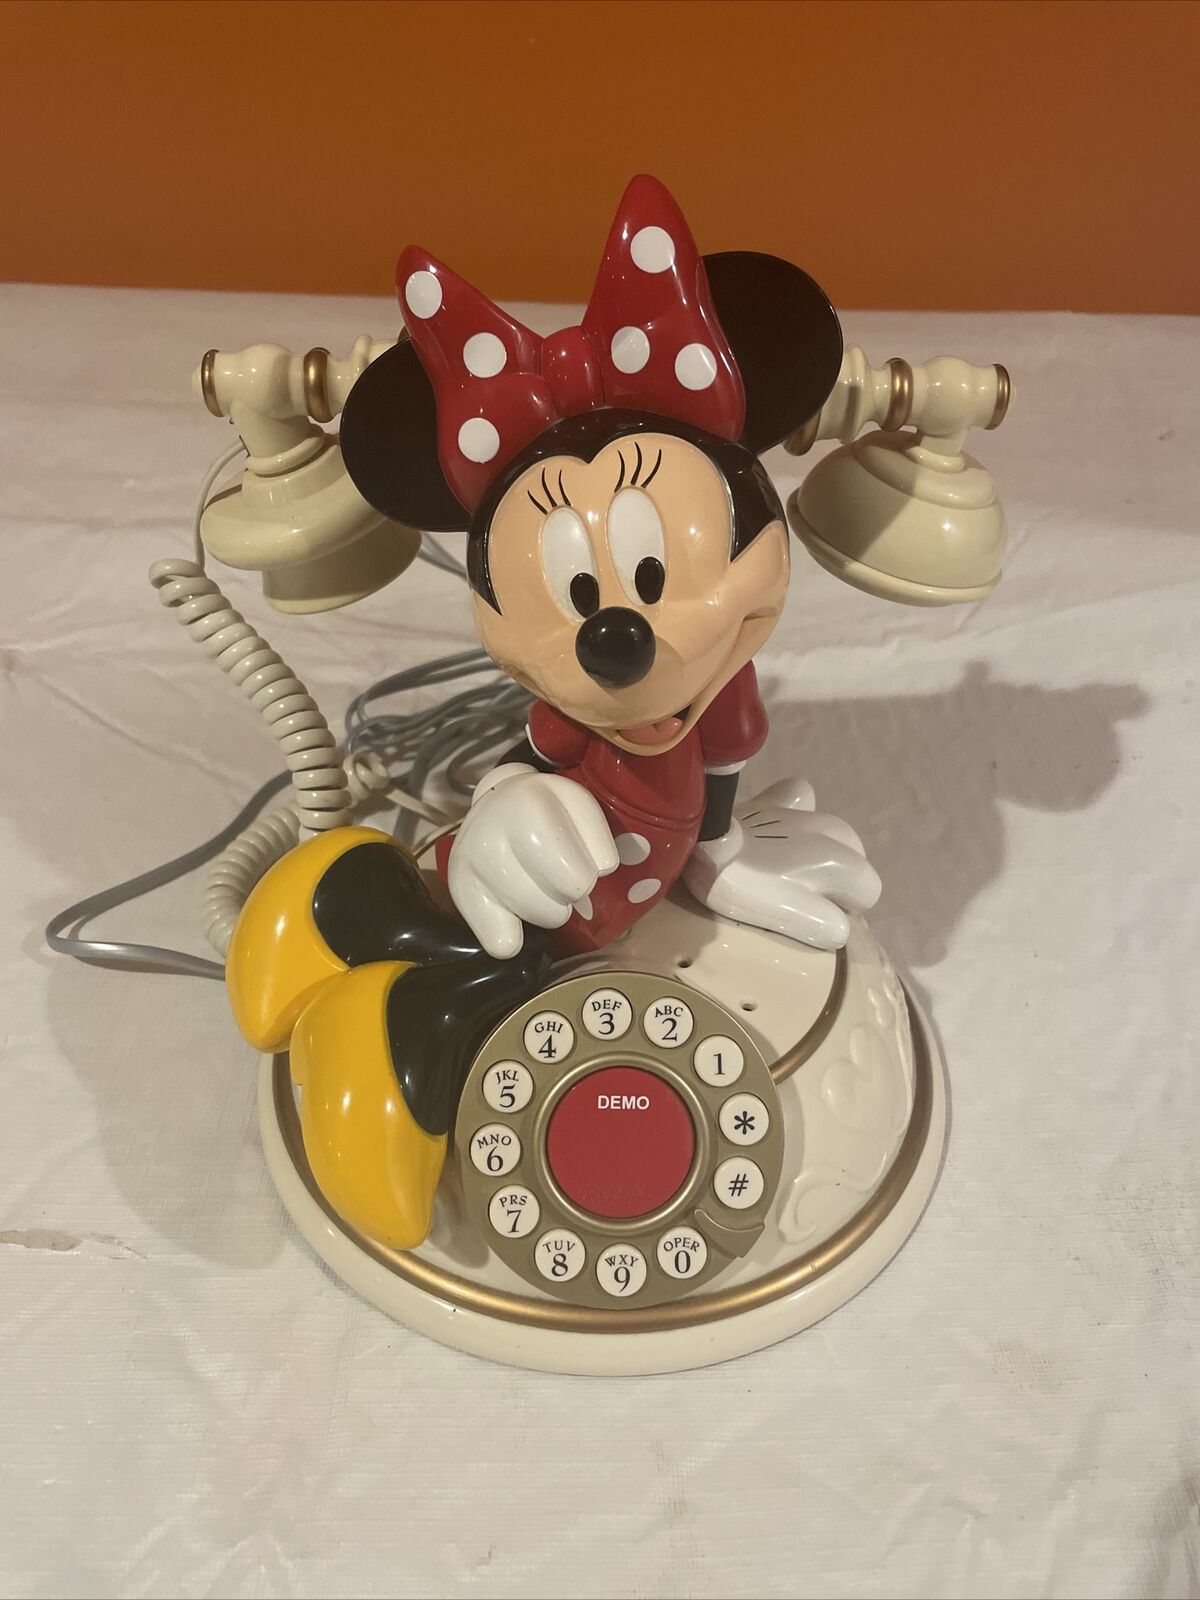 Disney Minnie Mouse Vintage Style Dial Phone🐭